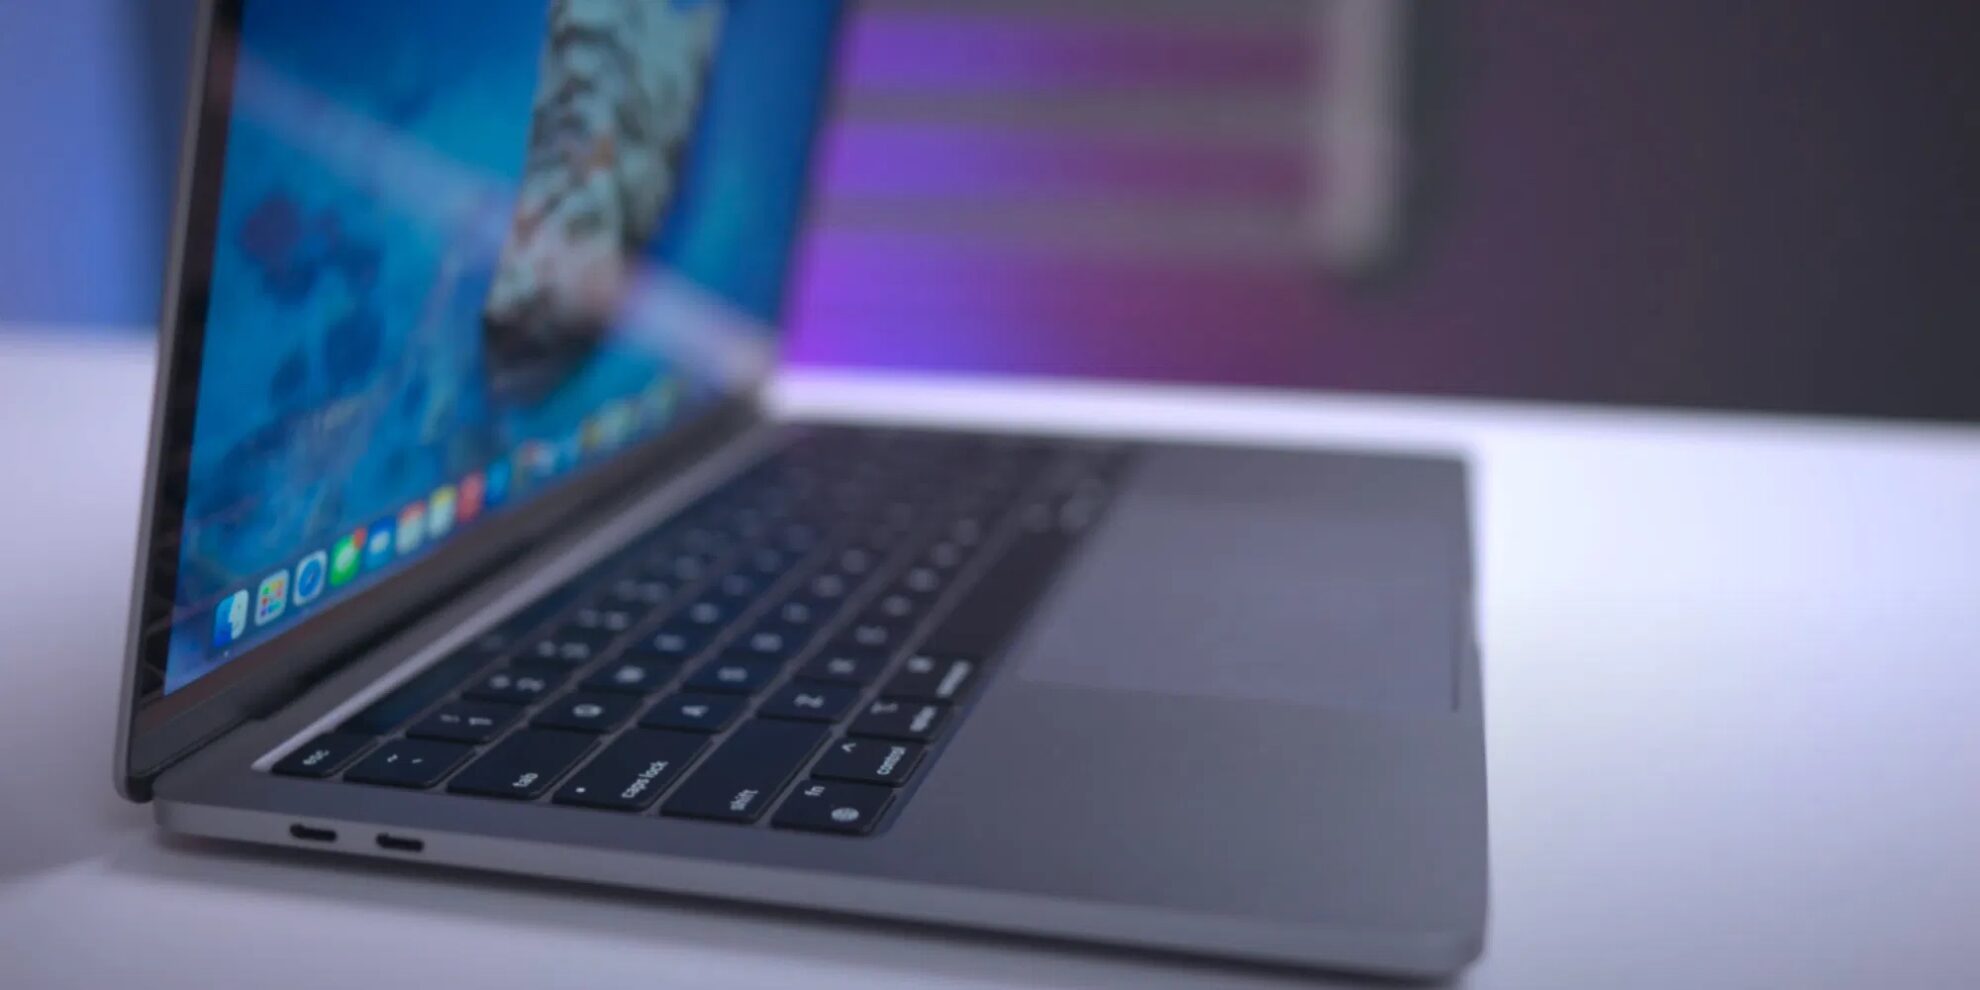 Rumor Nextgen MacBook Pro notebooks could feature SD card slot with